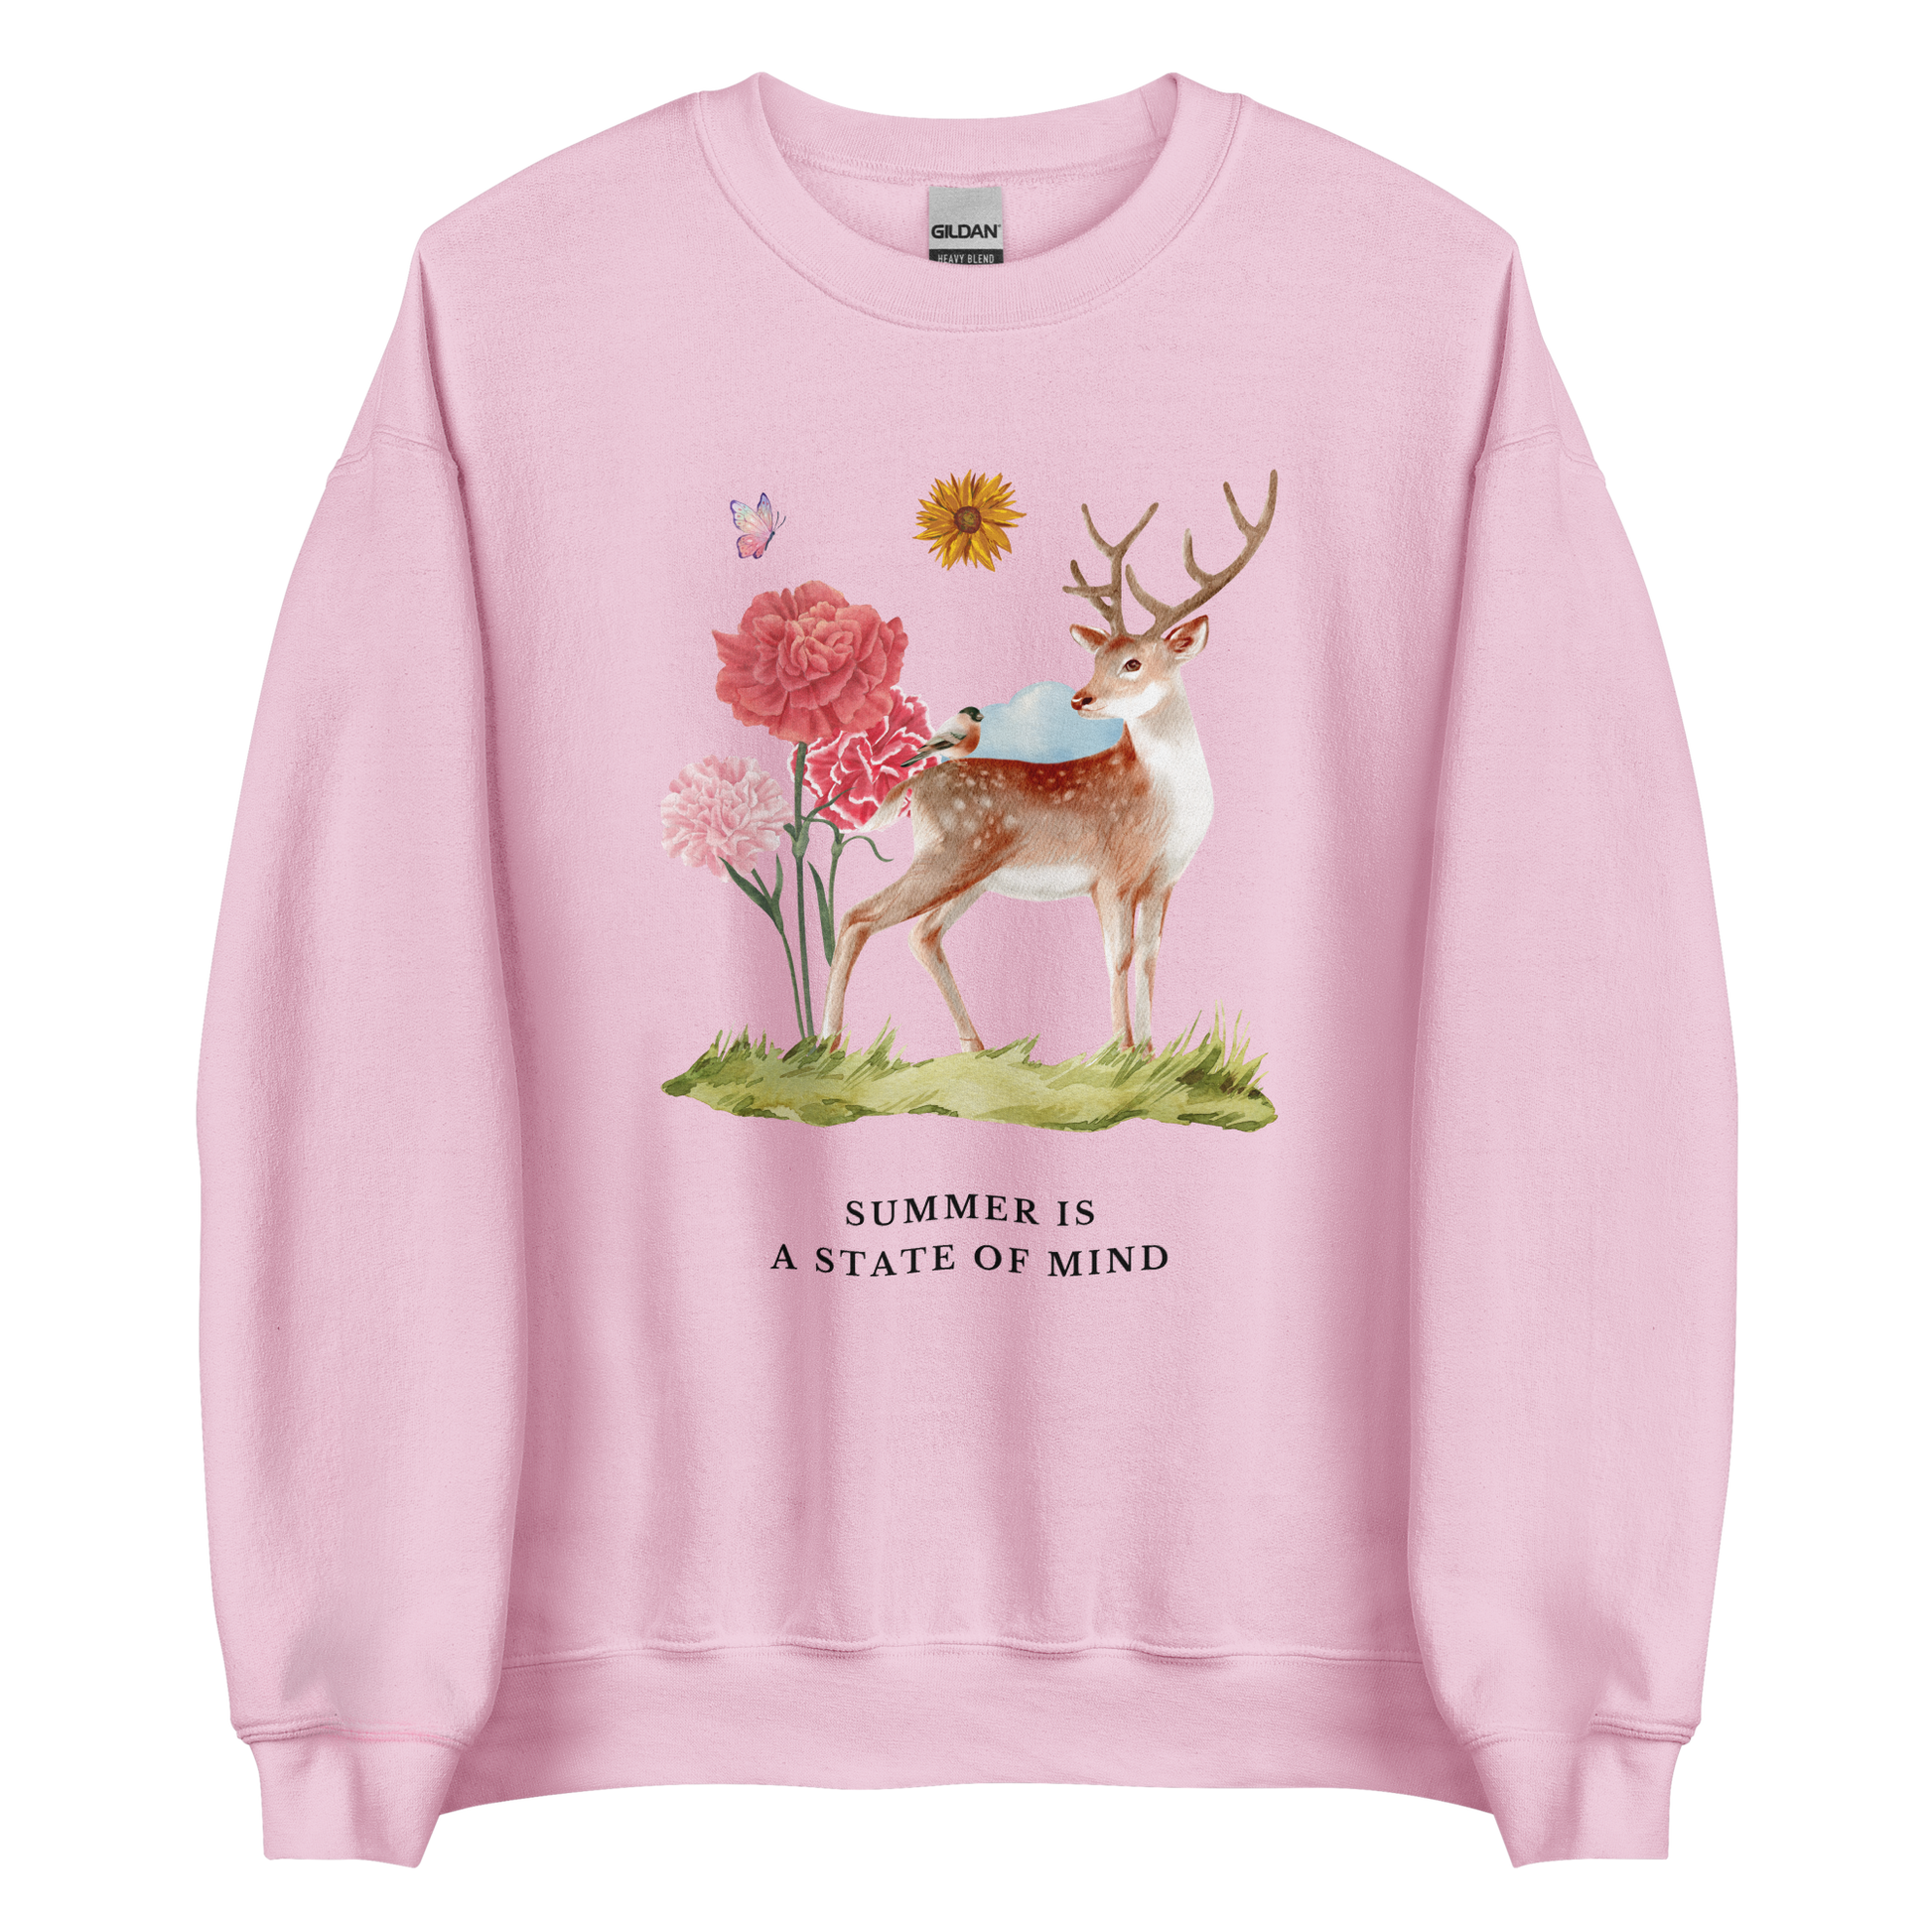 Light Pink Summer Is a State of Mind Sweatshirt featuring a Summer Is a State of Mind graphic on the chest - Cute Graphic Summer Sweatshirts - Boozy Fox